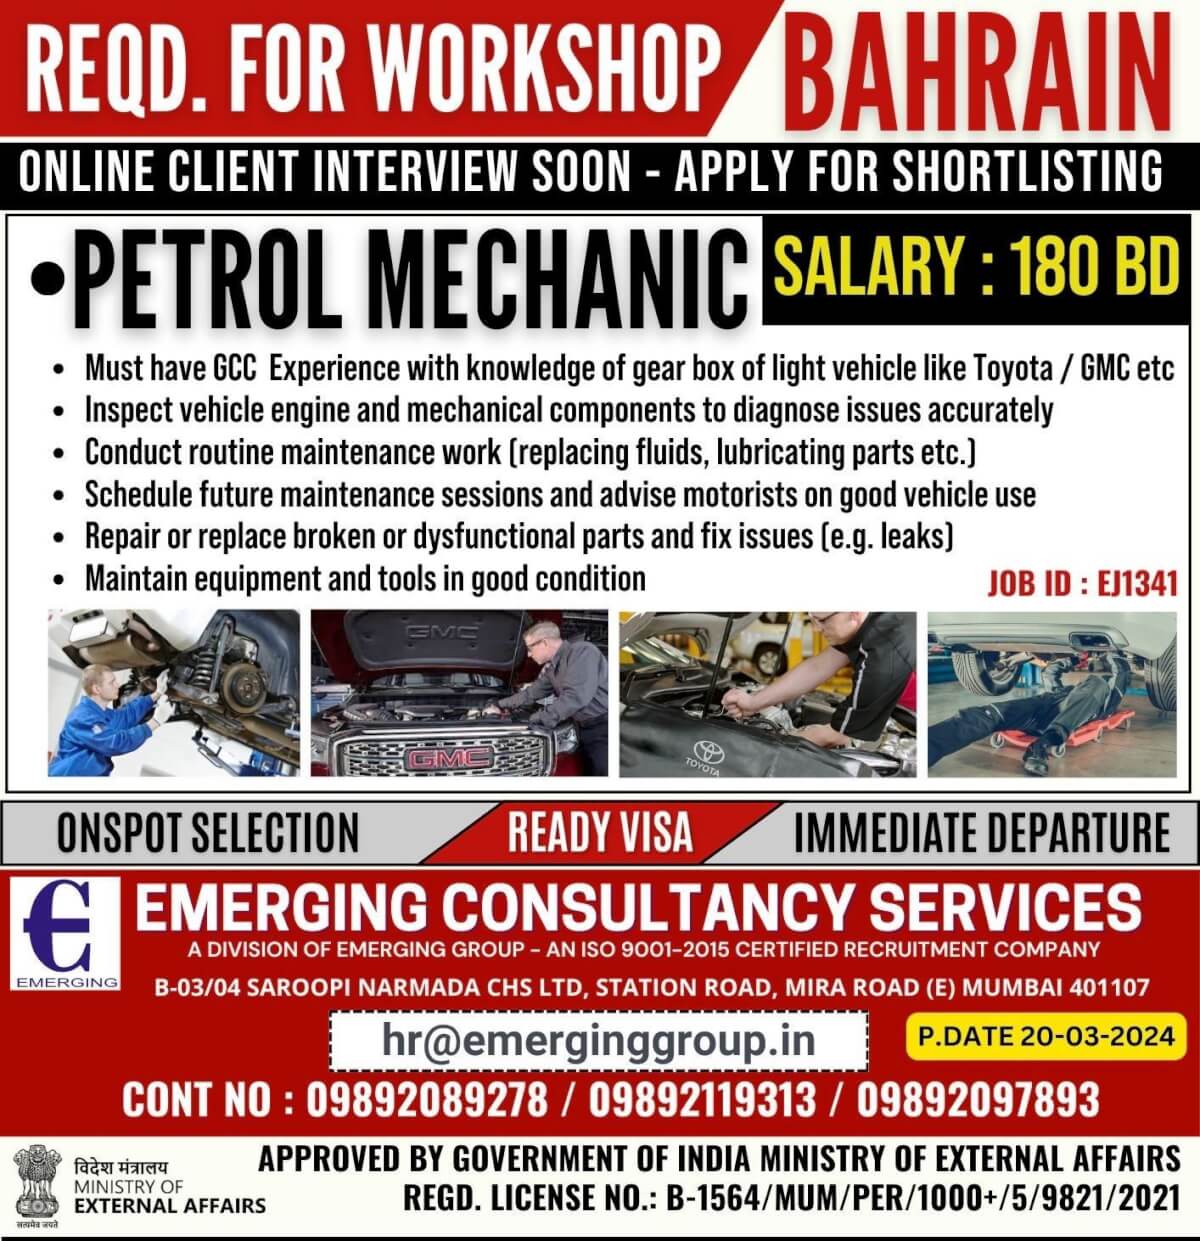 REQD. FOR WORKSHOP  IN BAHRAIN -ONLINE CLIENT INTERVIEW SOON - APPLY FOR SHORTLISTING